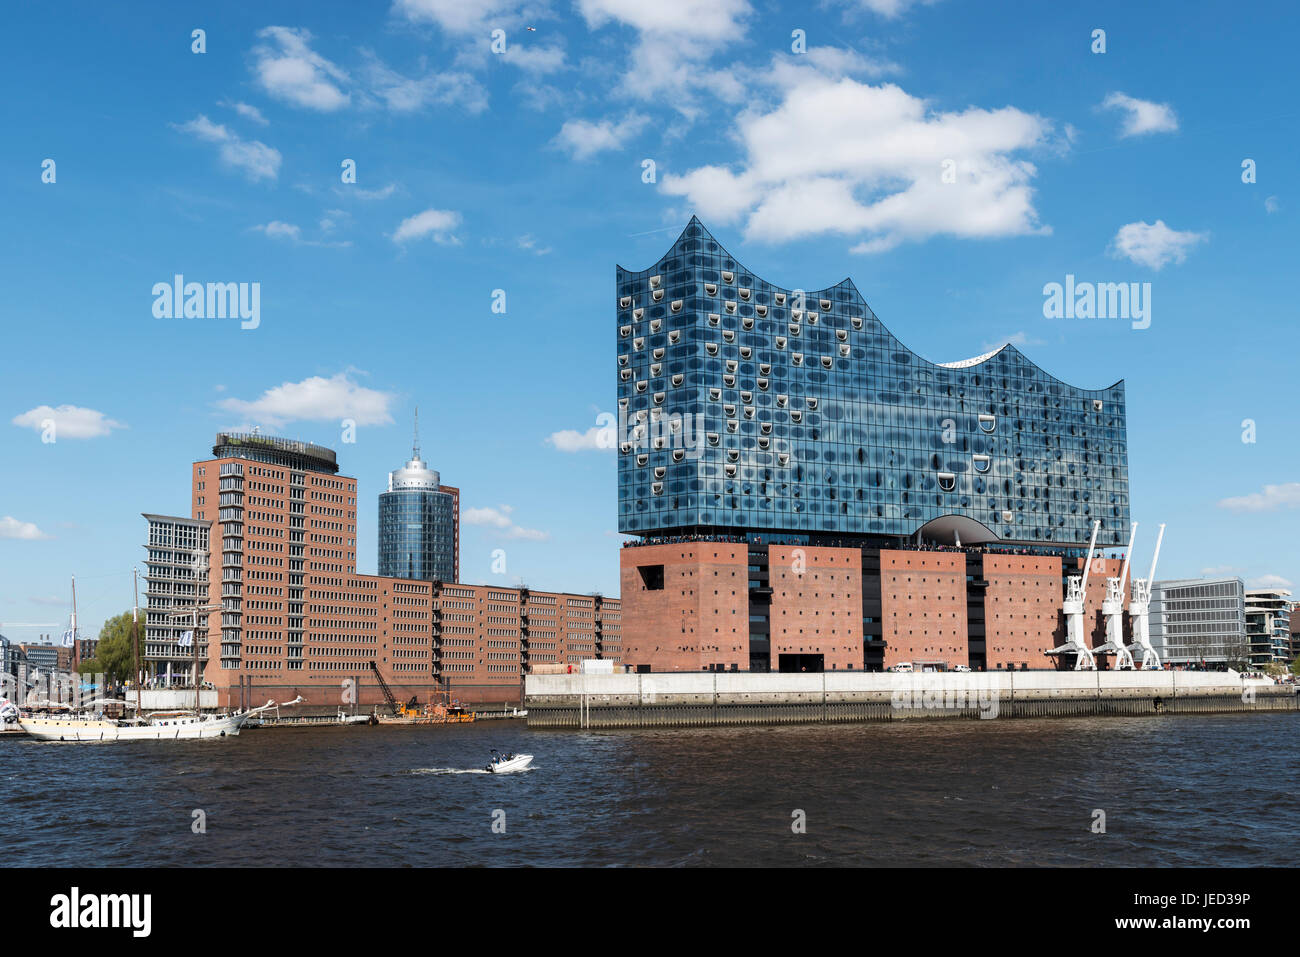 Elbphilharmonie, Hamburg's new landmark concert hall, is being erected on a former port warehouse with a shining glass facade Stock Photo